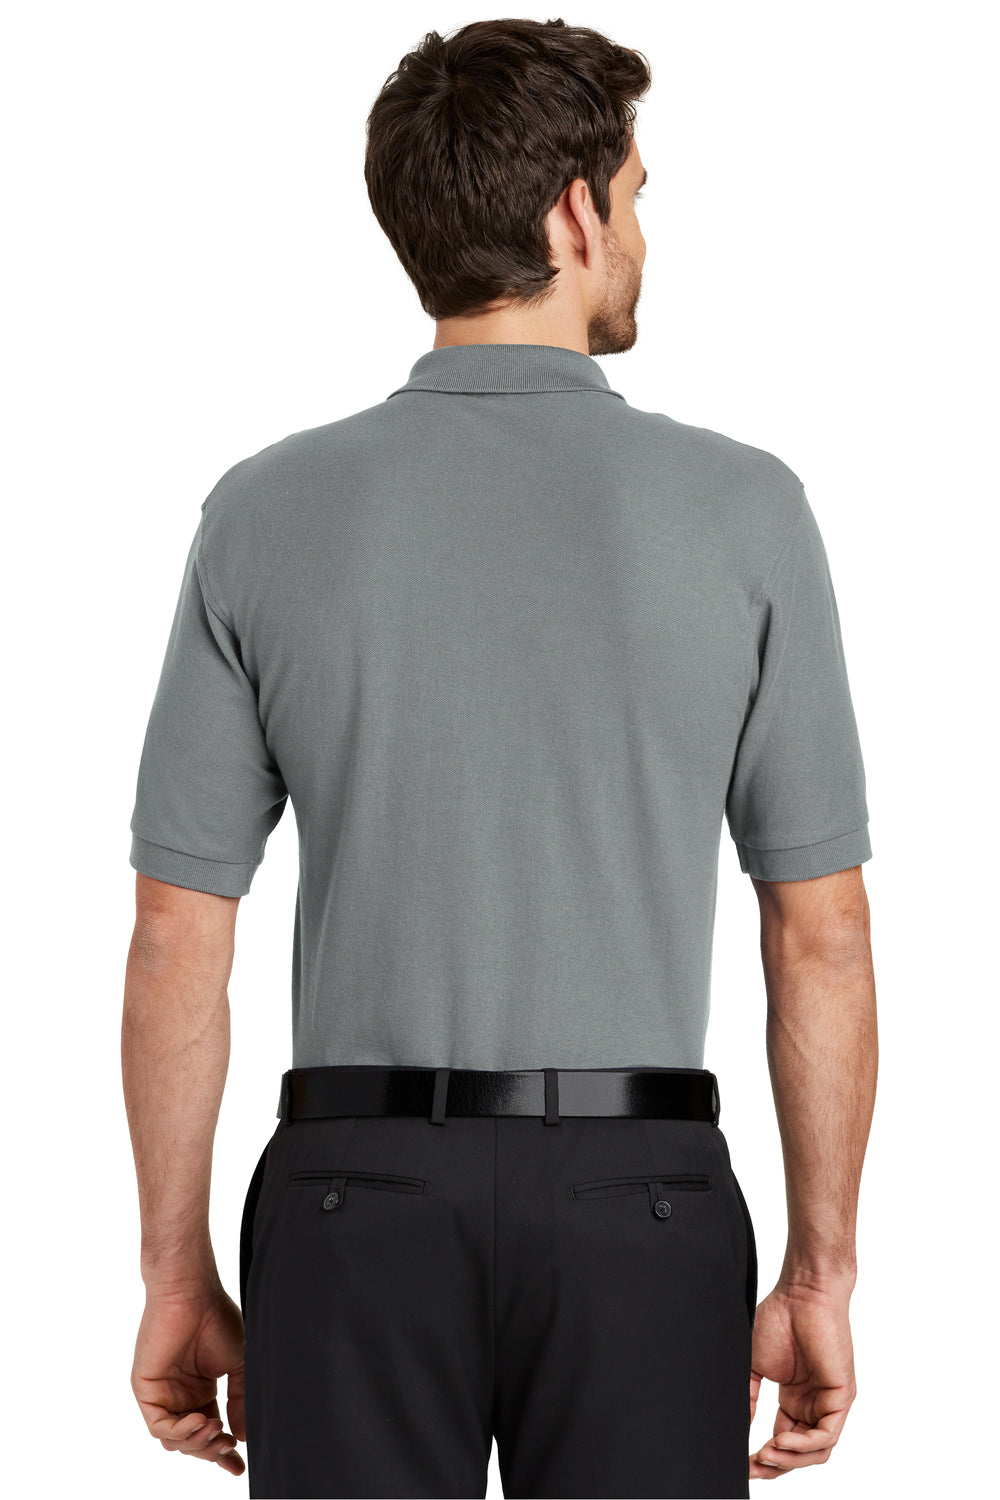 Port Authority K500P Mens Silk Touch Wrinkle Resistant Short Sleeve Polo Shirt w/ Pocket Cool Grey Back